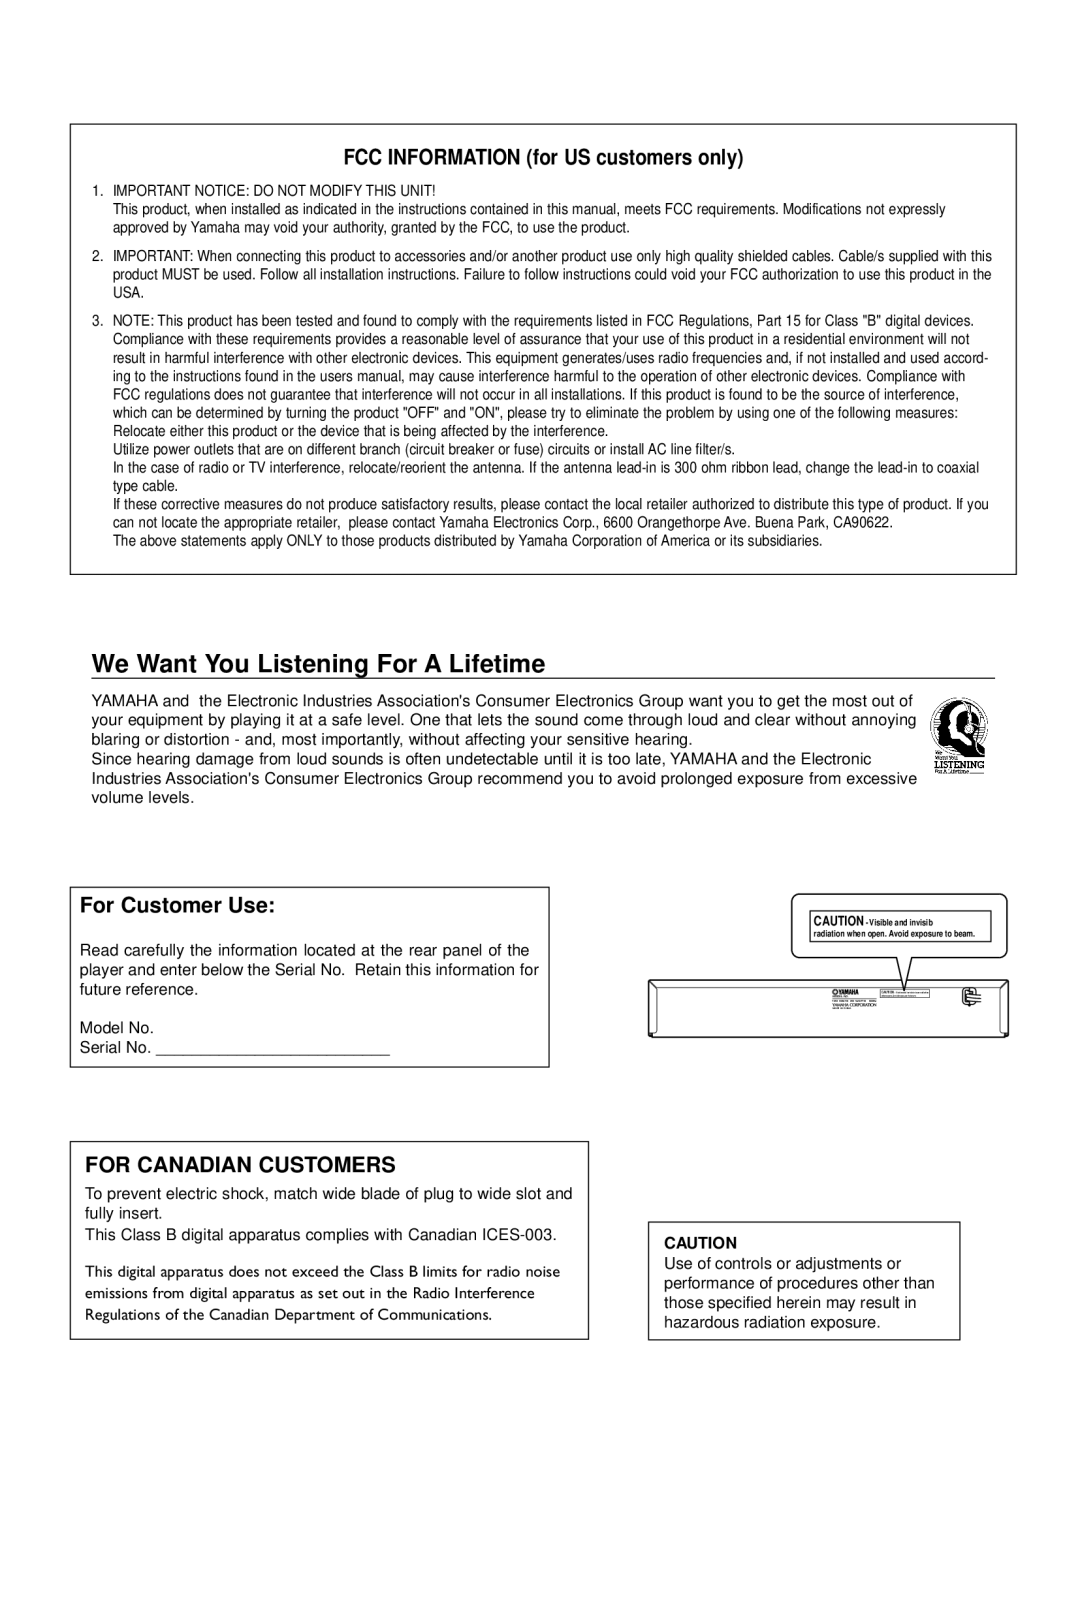 Yamaha DV-S5650 owner manual FCC INFORMATION for US customers only, For Customer Use, For Canadian Customers 